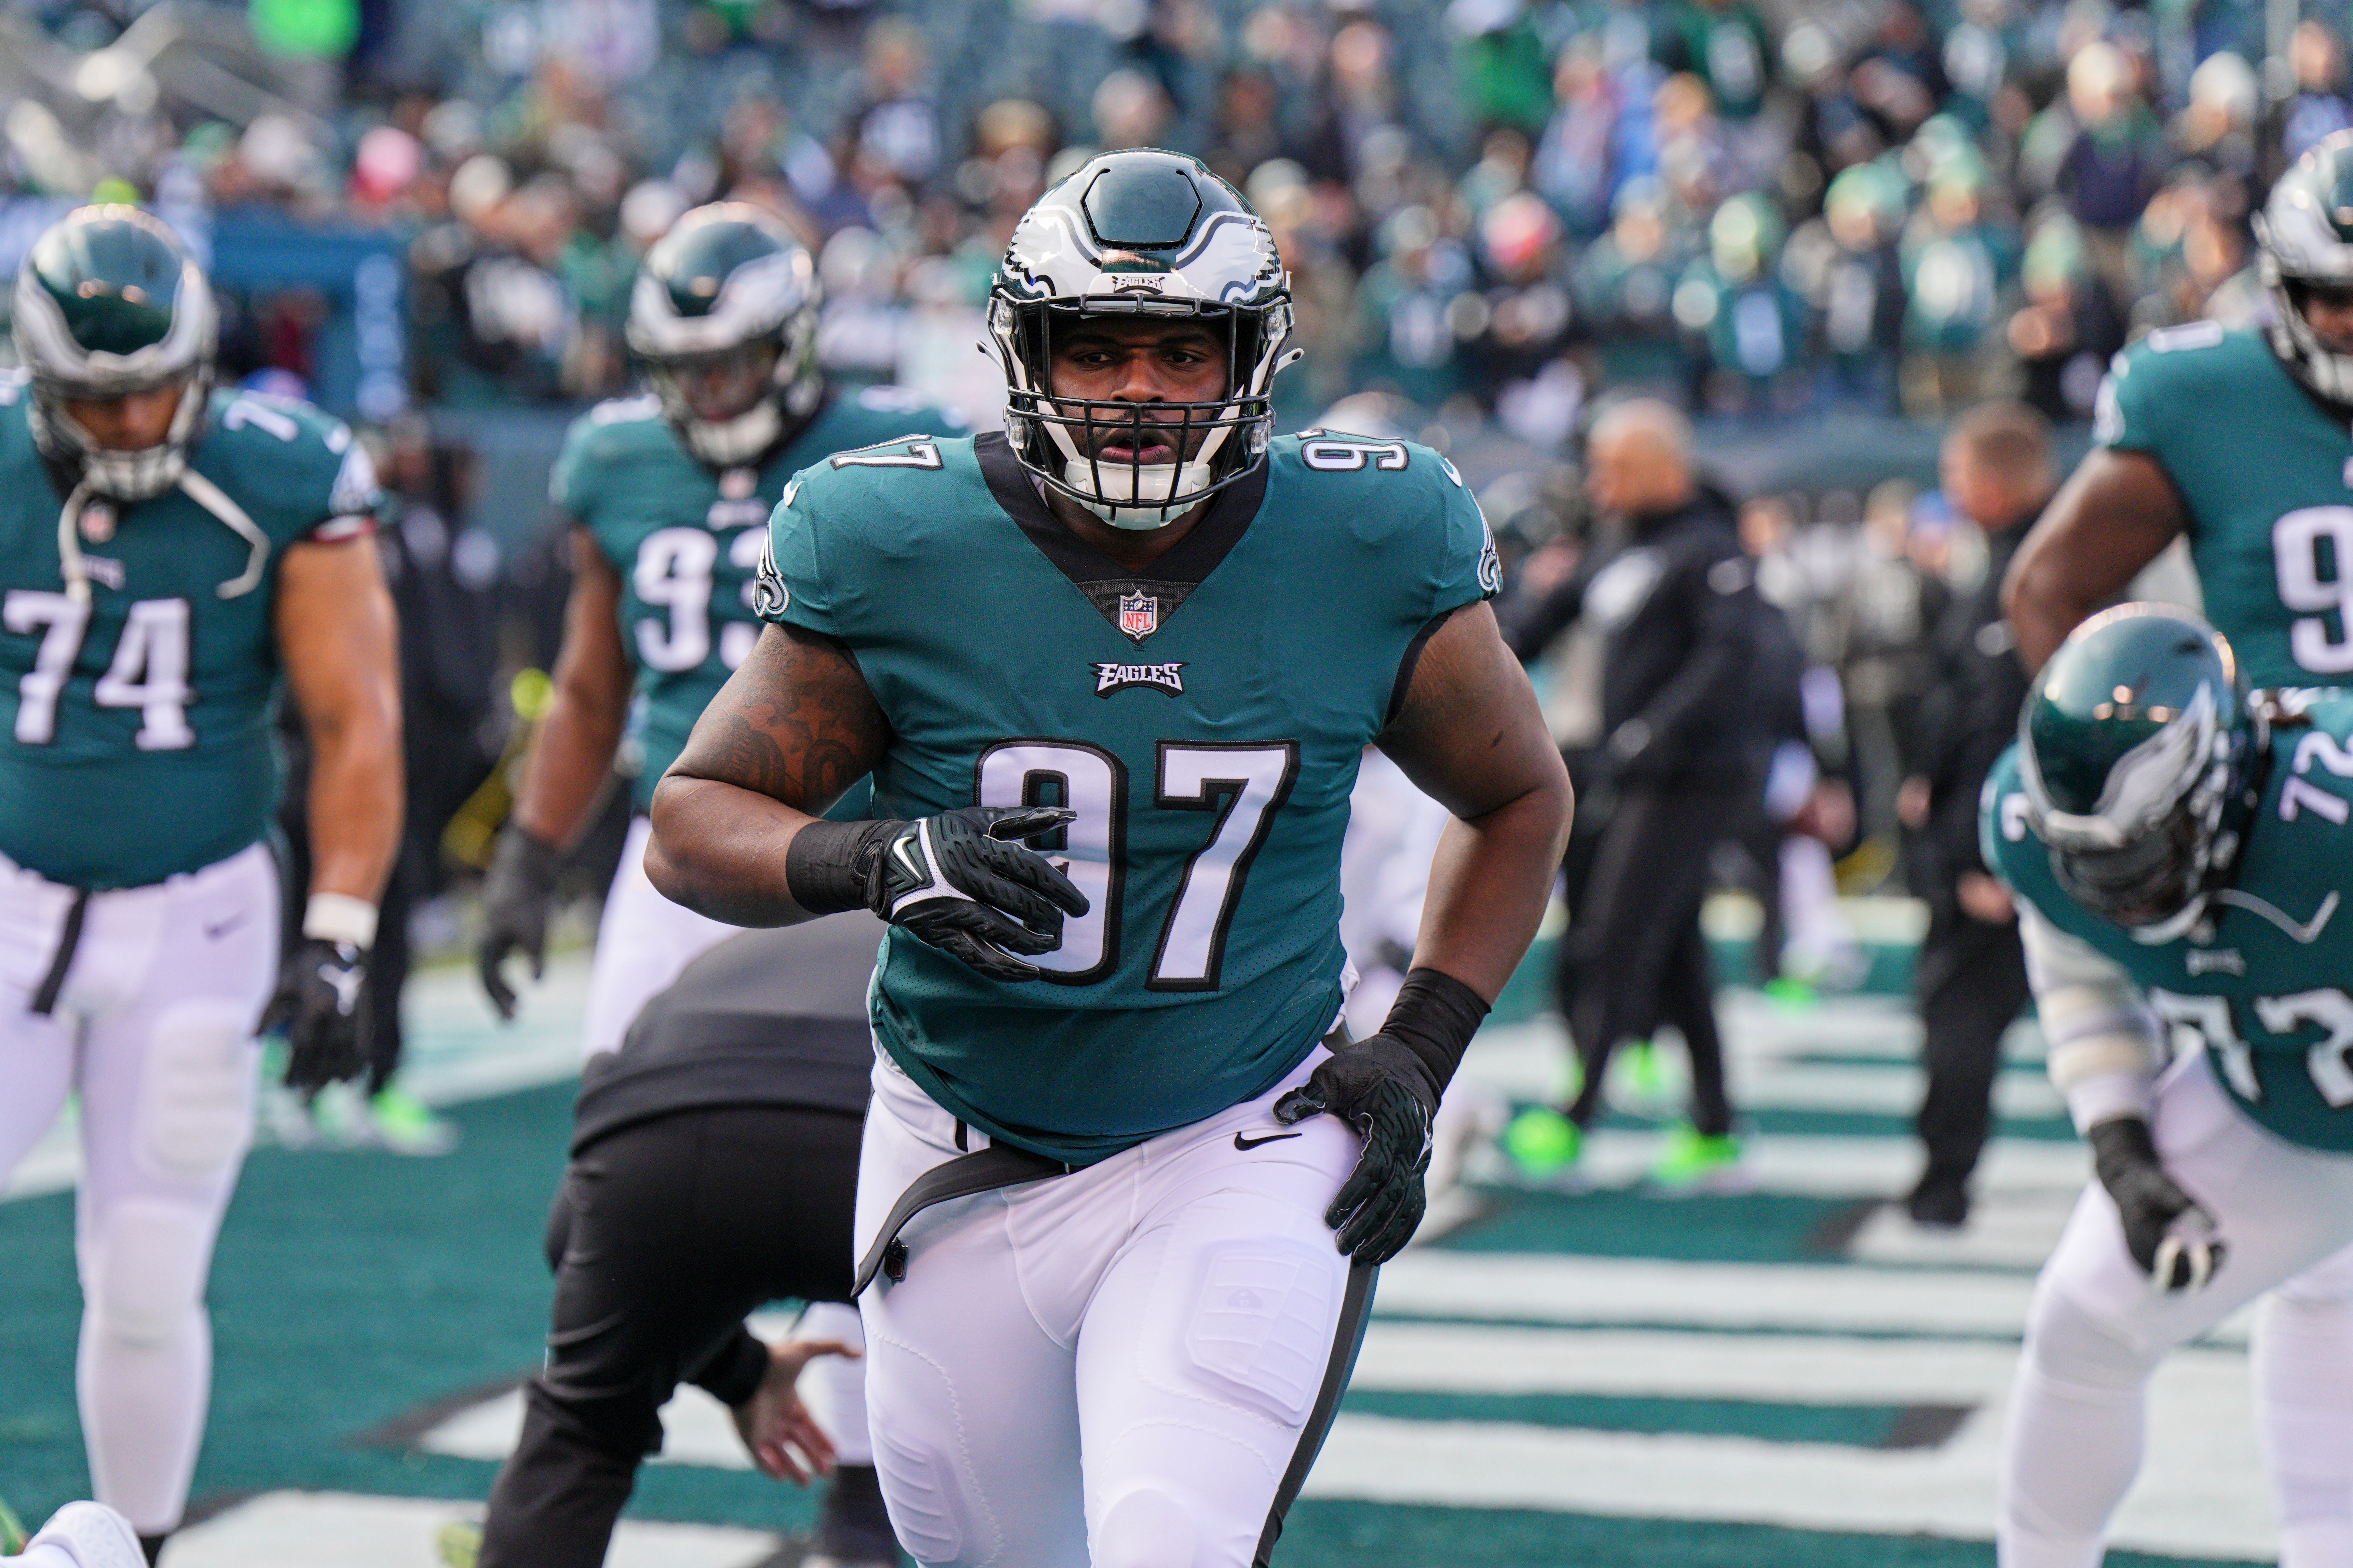 Defensive tackle Javon Hargrave (#97) of the Philadelphia Eagles warms up during the game against the Tennessee Titans at Lincoln Financial Field in Philadelphia, Pennsylvania, December 4, 2022. /CFP